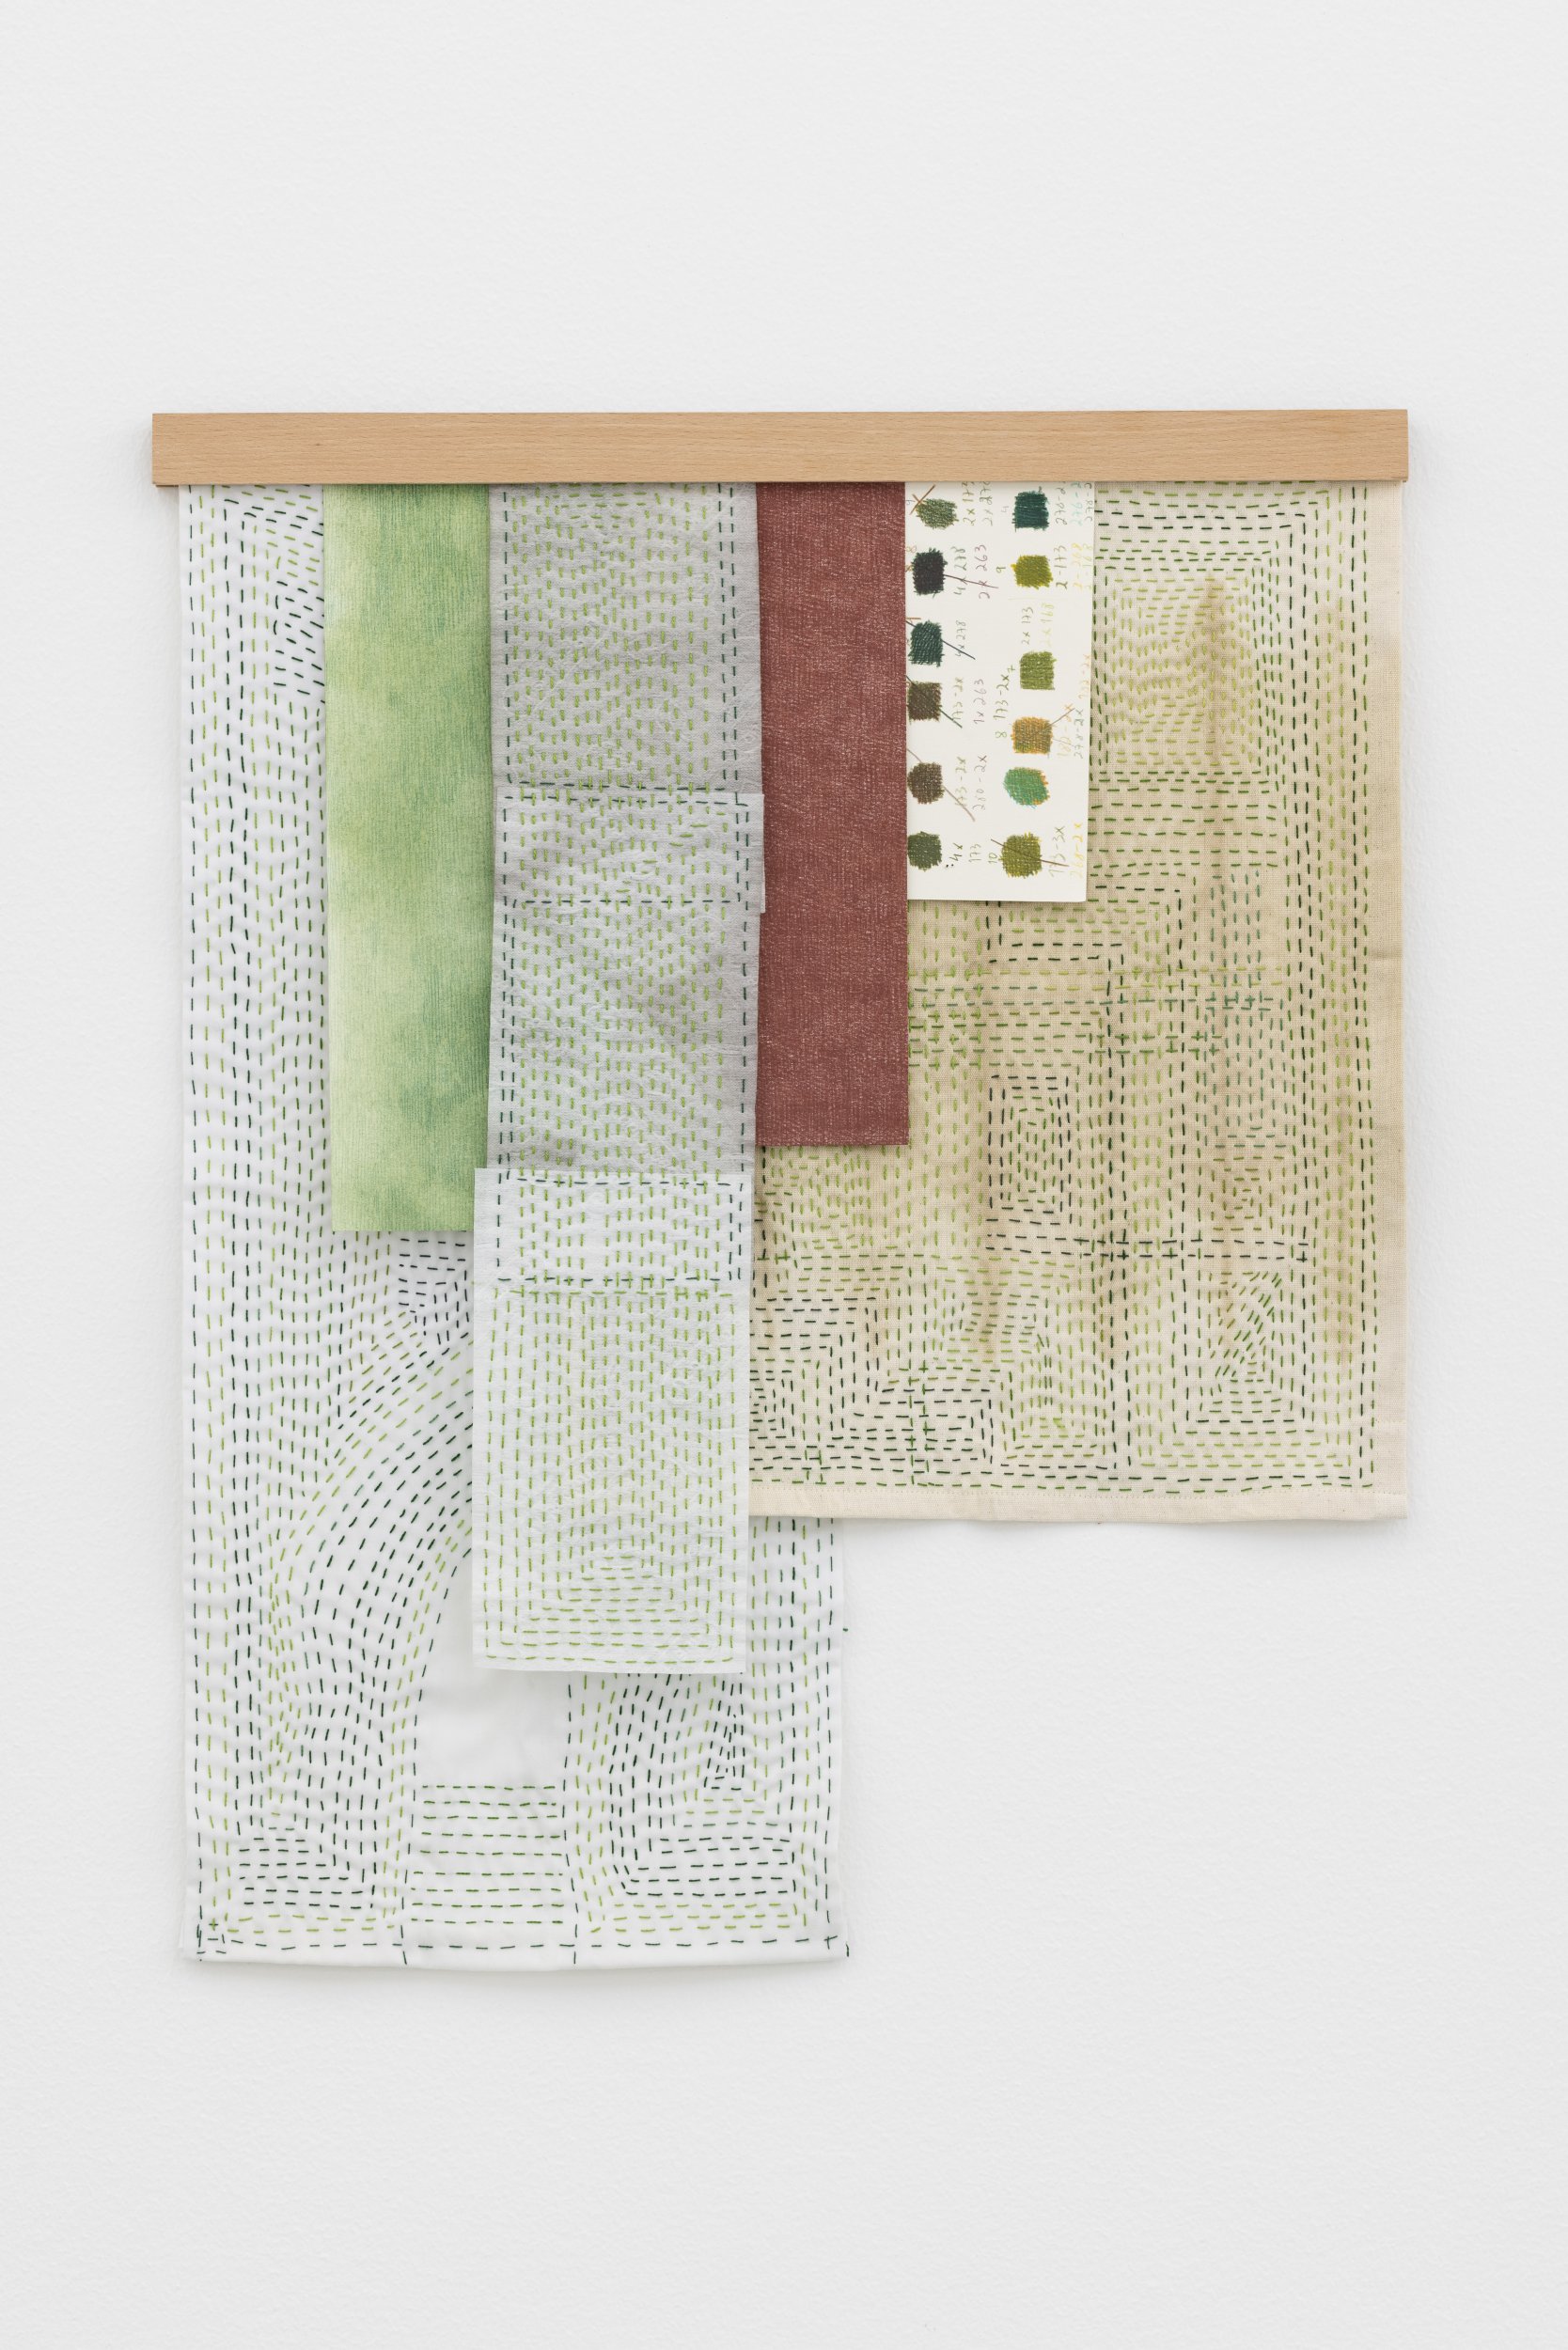 Gabriela Albergaria, Têxteis #18, 2023. Repurposed “Color Catch” textiles with sashiko embroidery, cotton thread, pastel and color pencil on salvaged drawing paper. 64 x 61 cm. Unique
